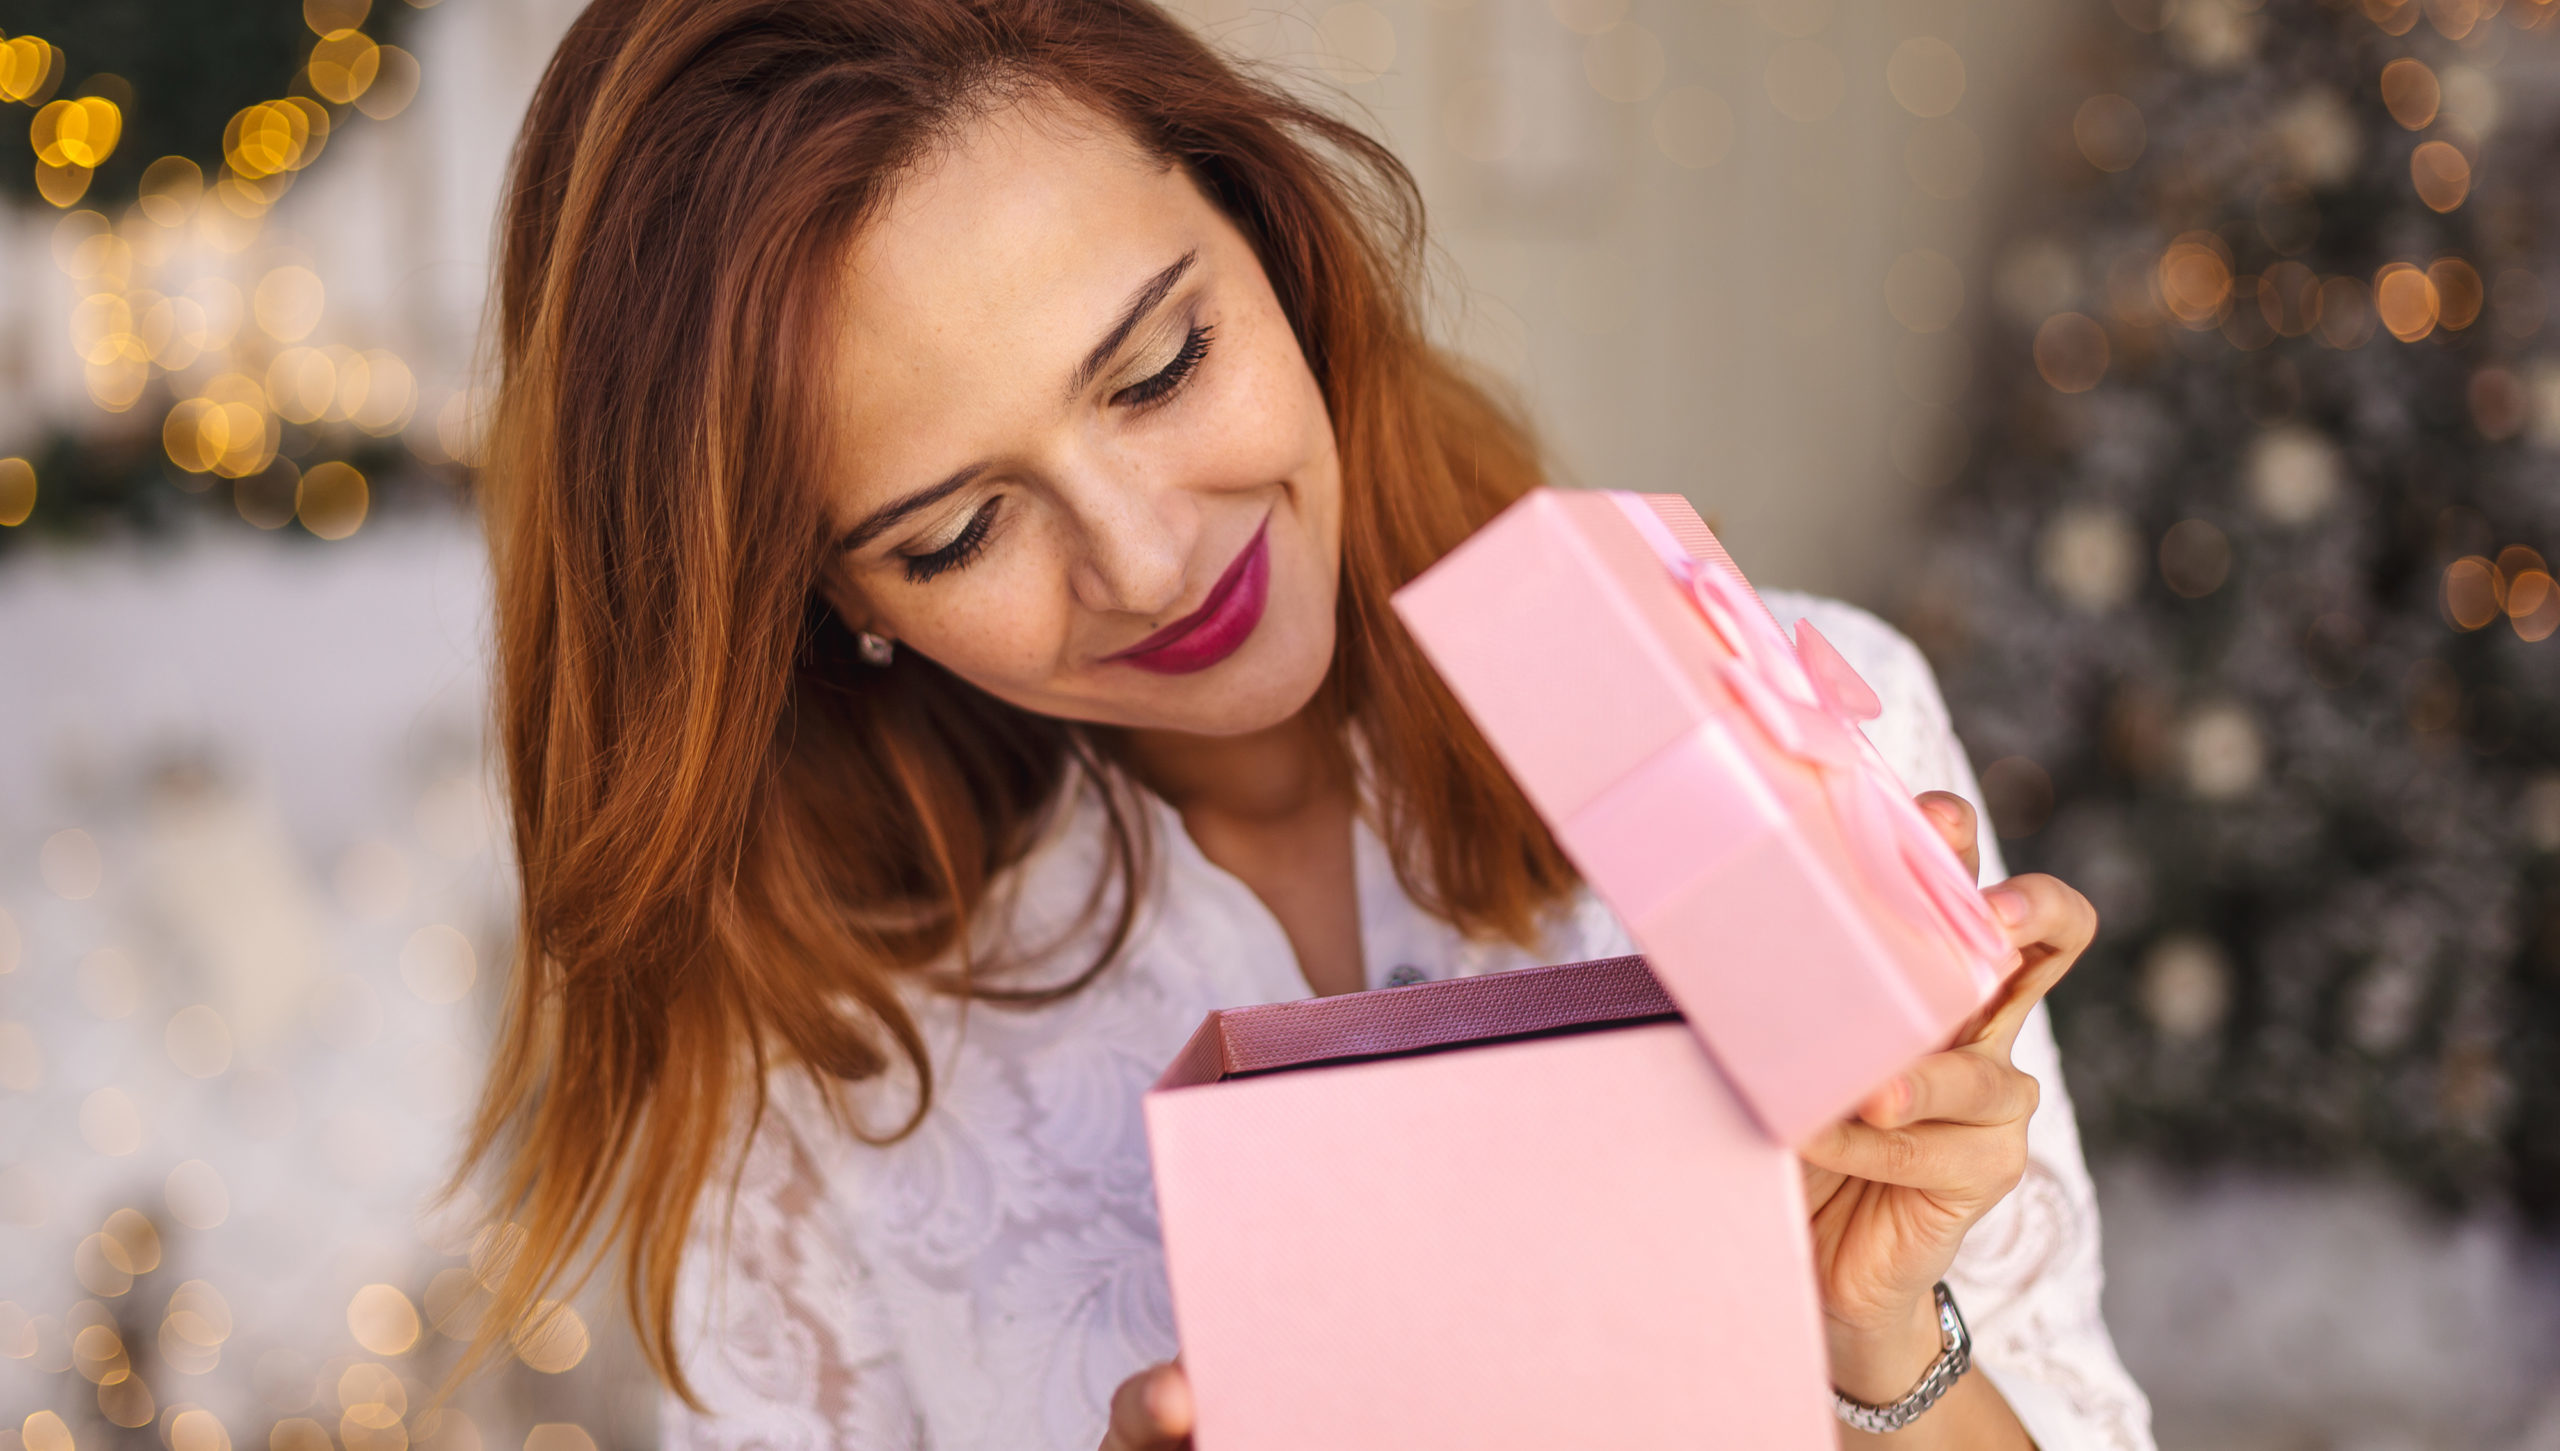 Q&A with Postal: Why Direct Mail and Gifting Helps Increase Engagement